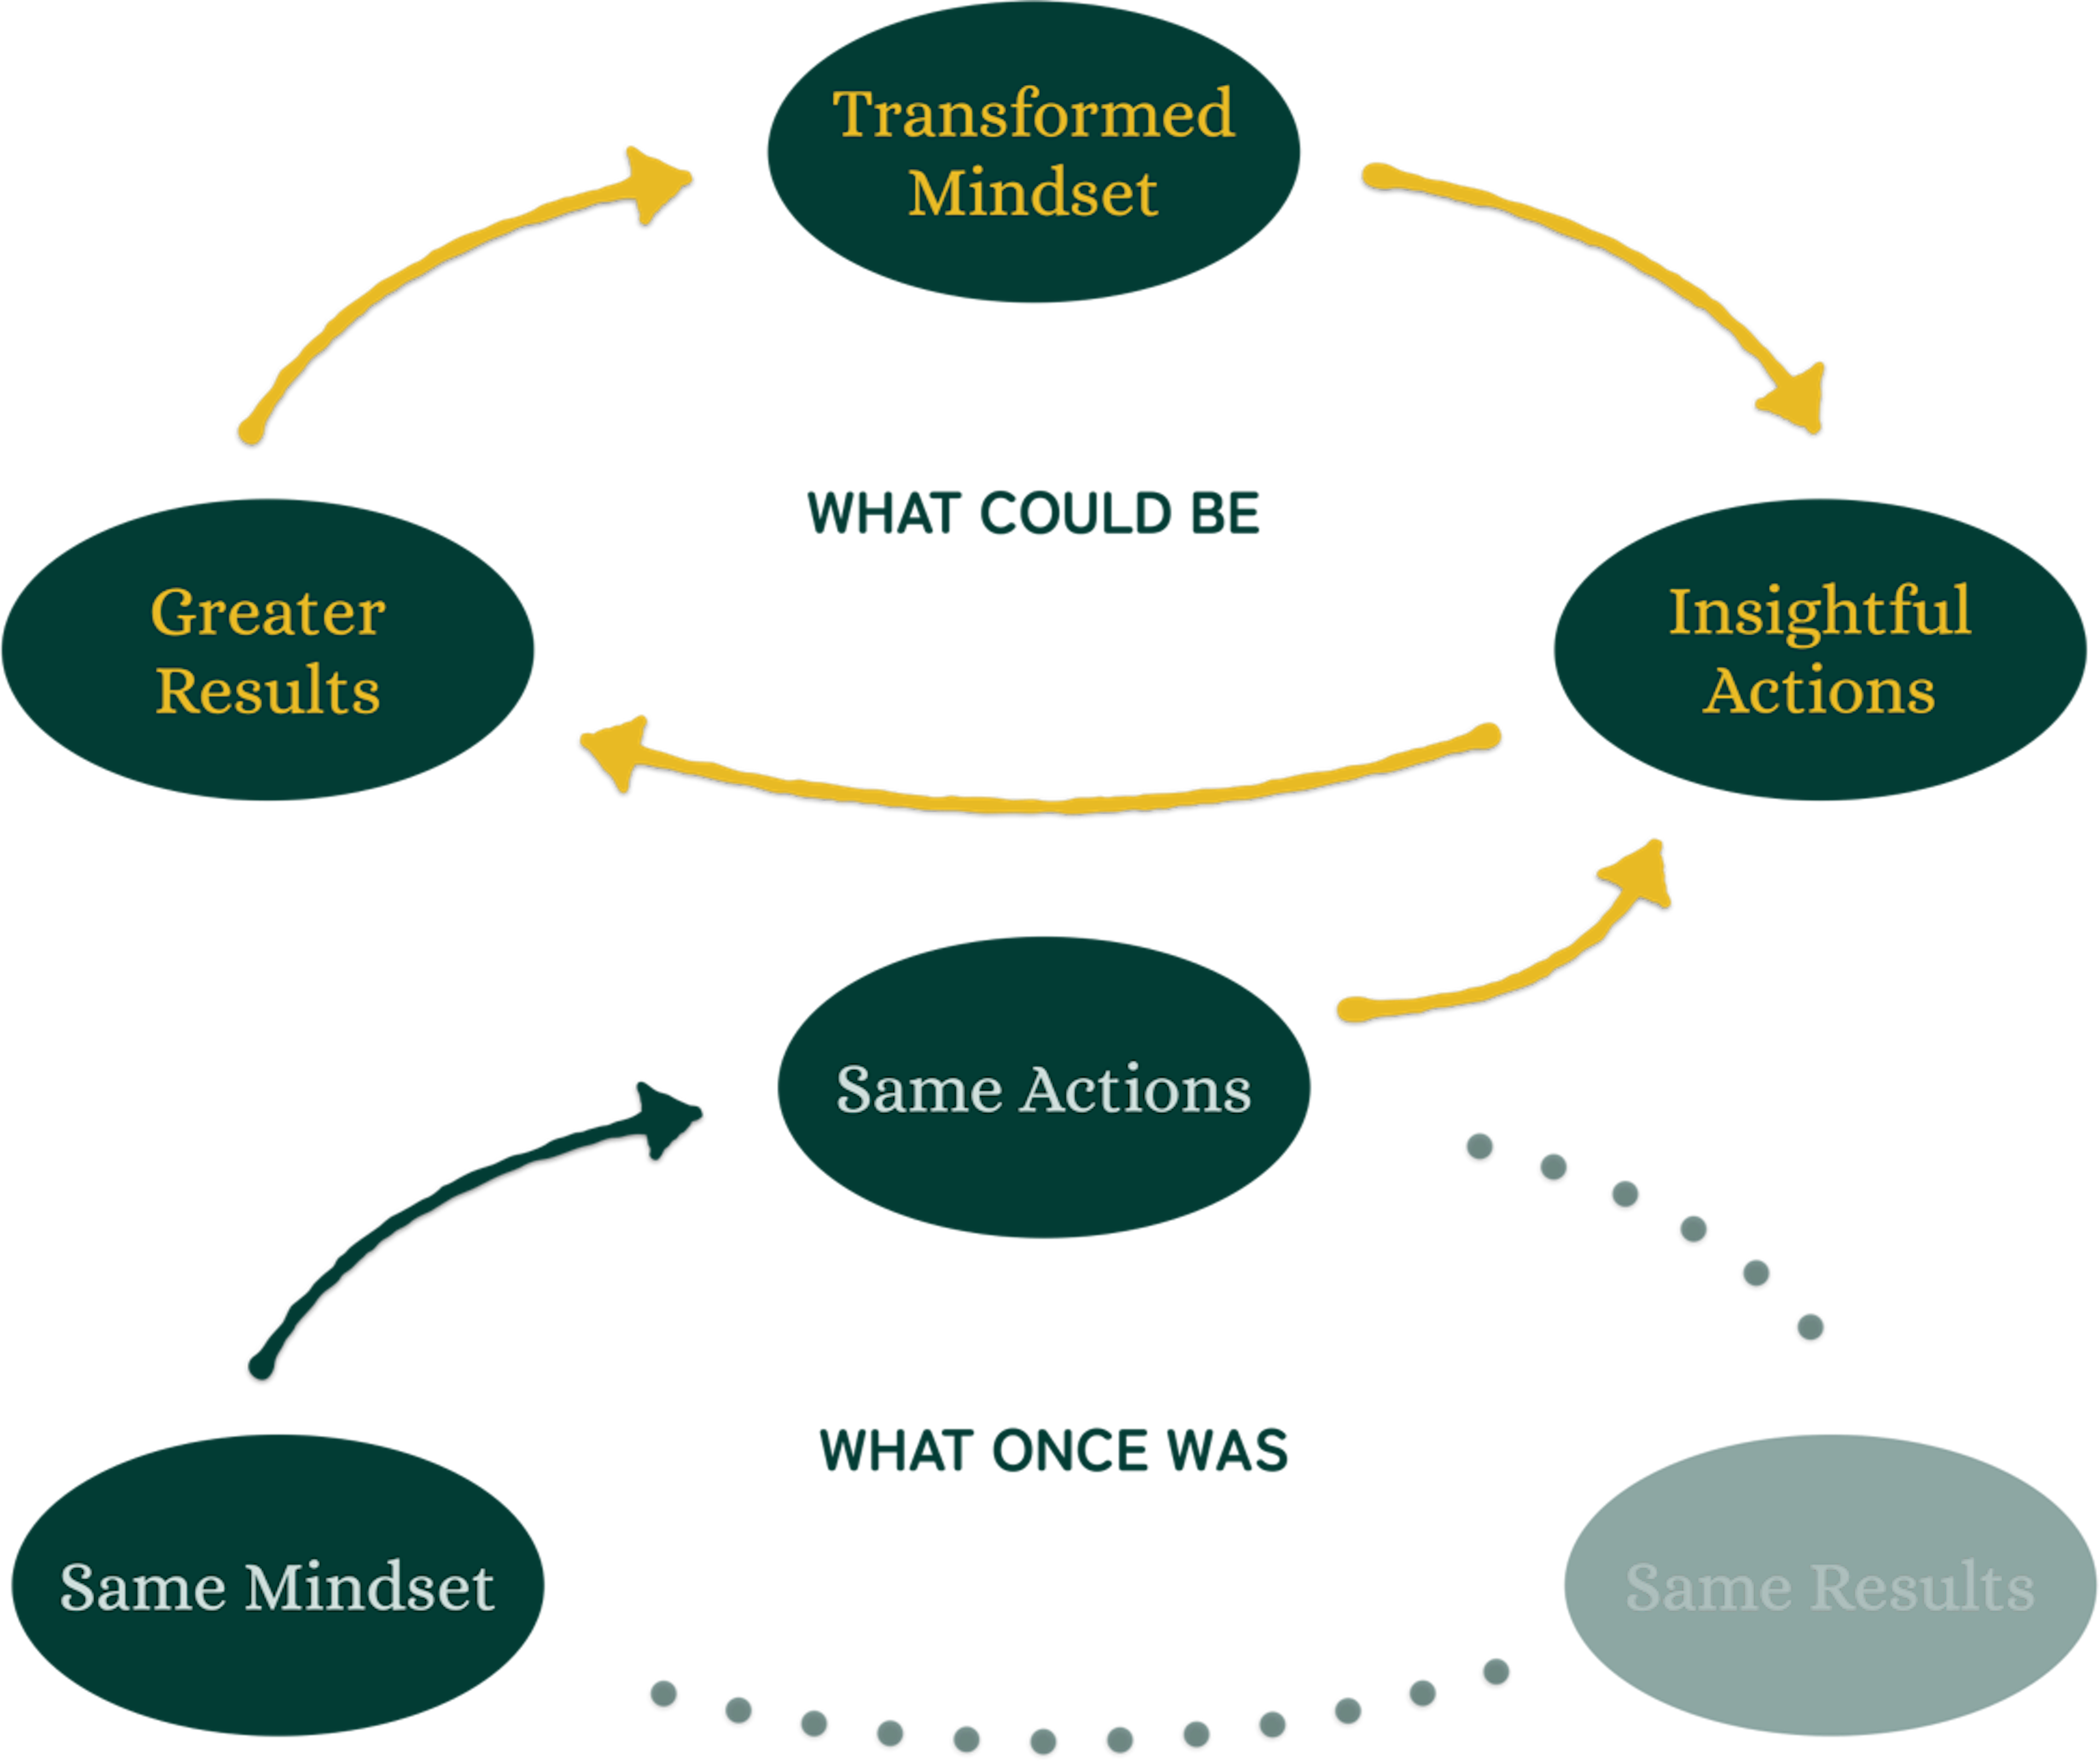 upward spiral shows how guided action, measured results and a transformed mindset create a positive cycle of self-empowerment